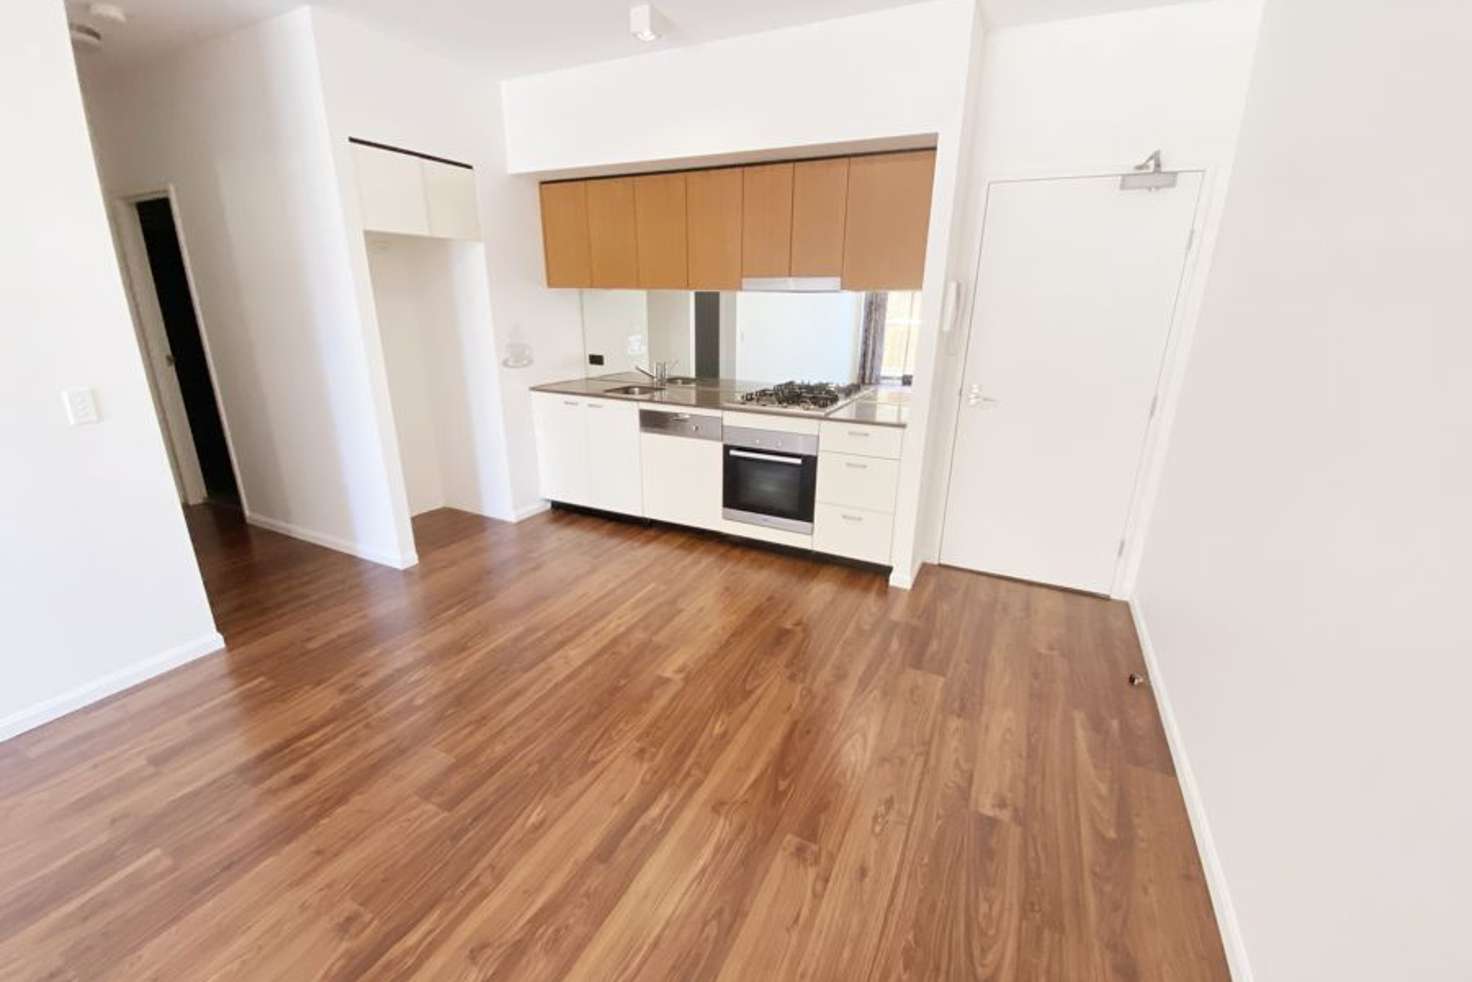 Main view of Homely apartment listing, 17 Gadigal Avenue, Zetland NSW 2017